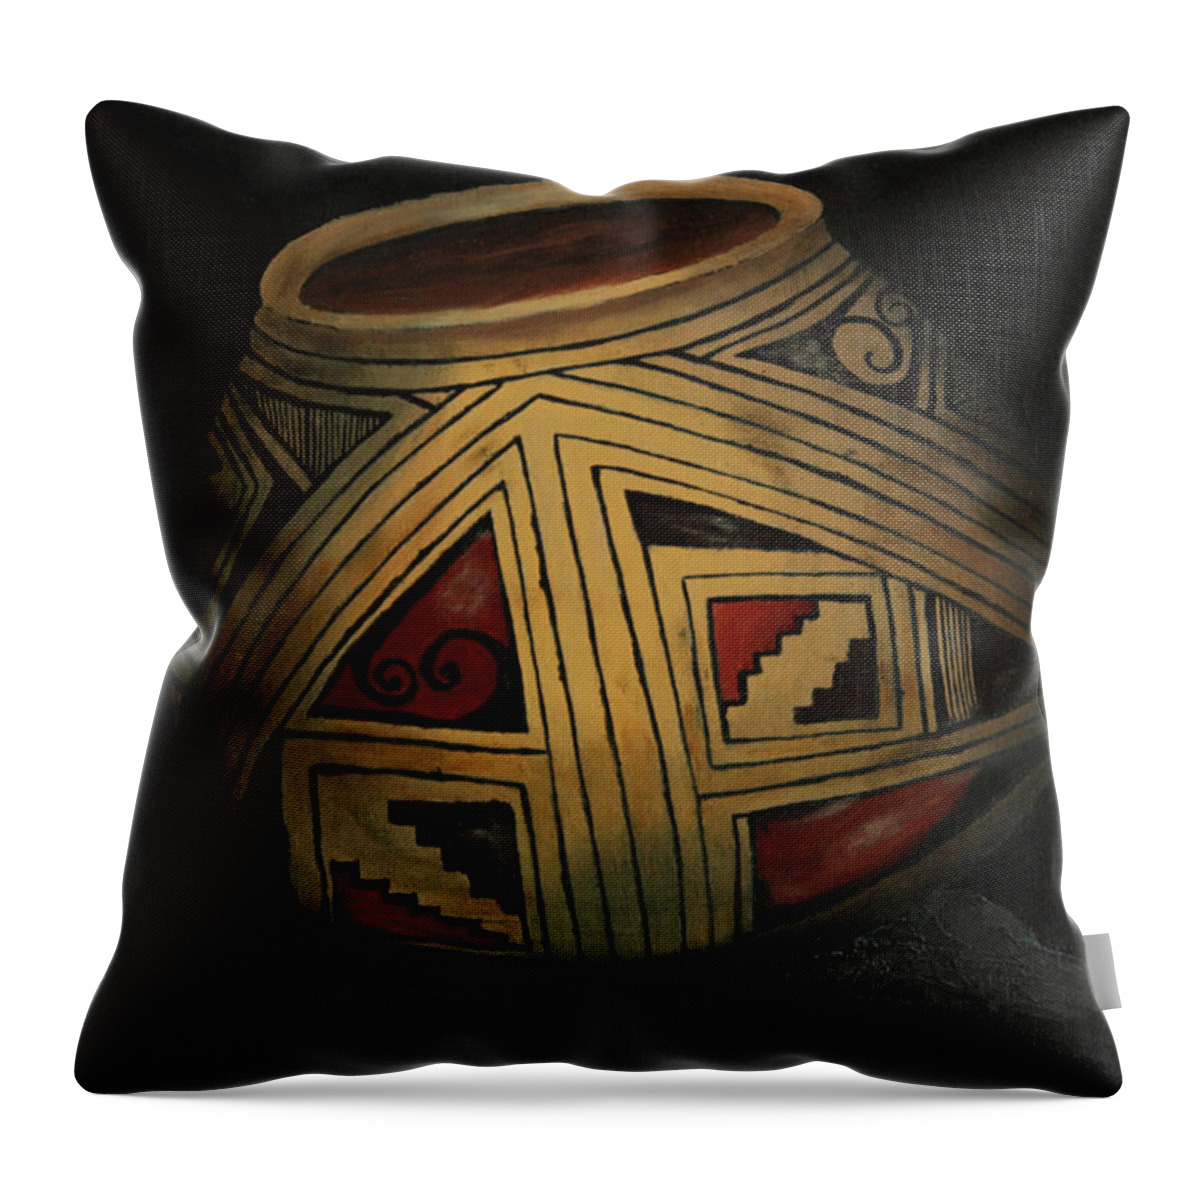  Throw Pillow featuring the painting Native American Pottery4 by Petra Stephens